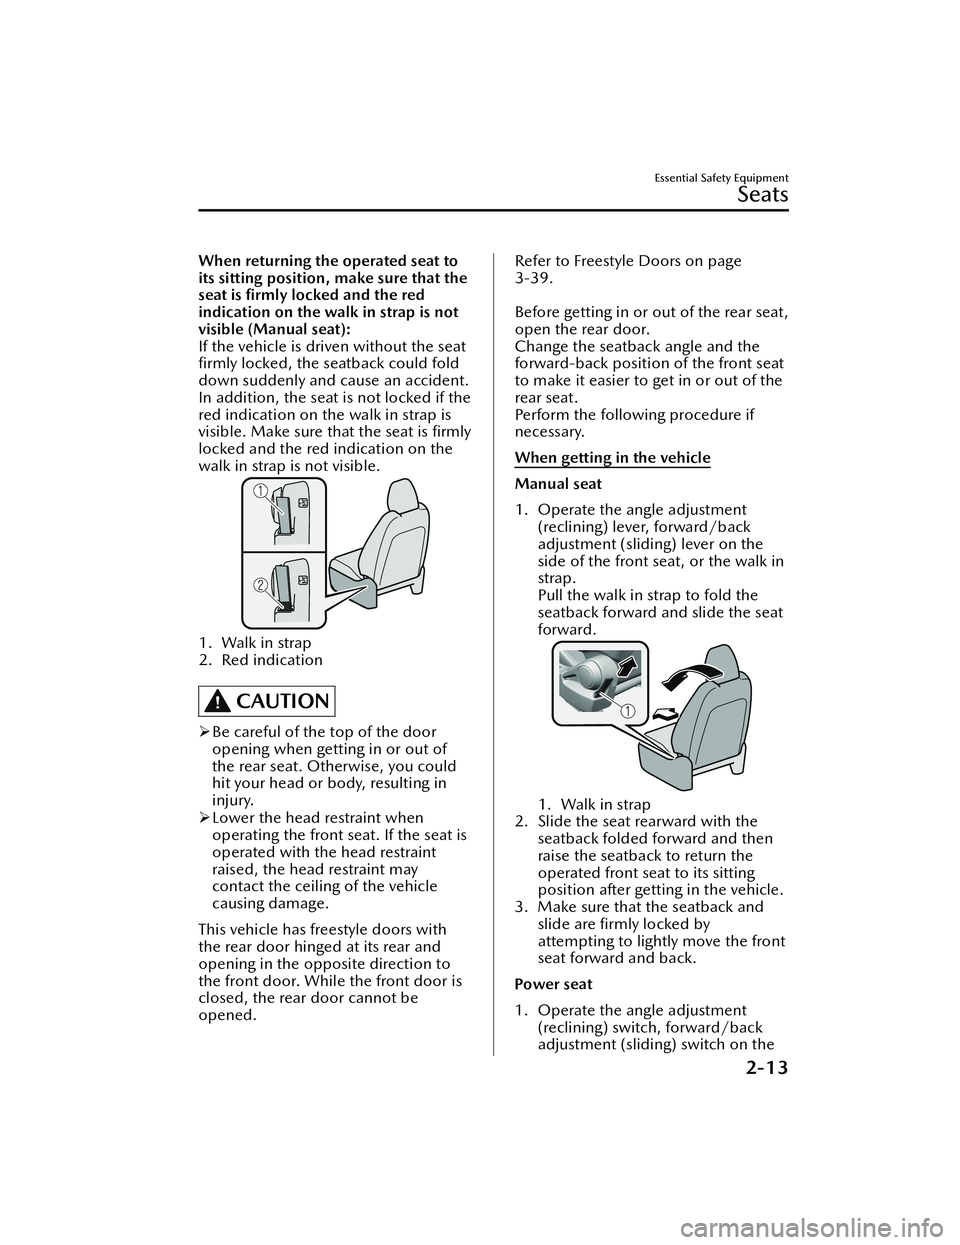 MAZDA MODEL MX-30 EV 2022  Owners Manual When returning the operated seat to
its sitting position, make sure that the
seat is ﬁrmly locked and the red
indication on the walk in strap is not
visible (Manual seat):
If the vehicle is driven w